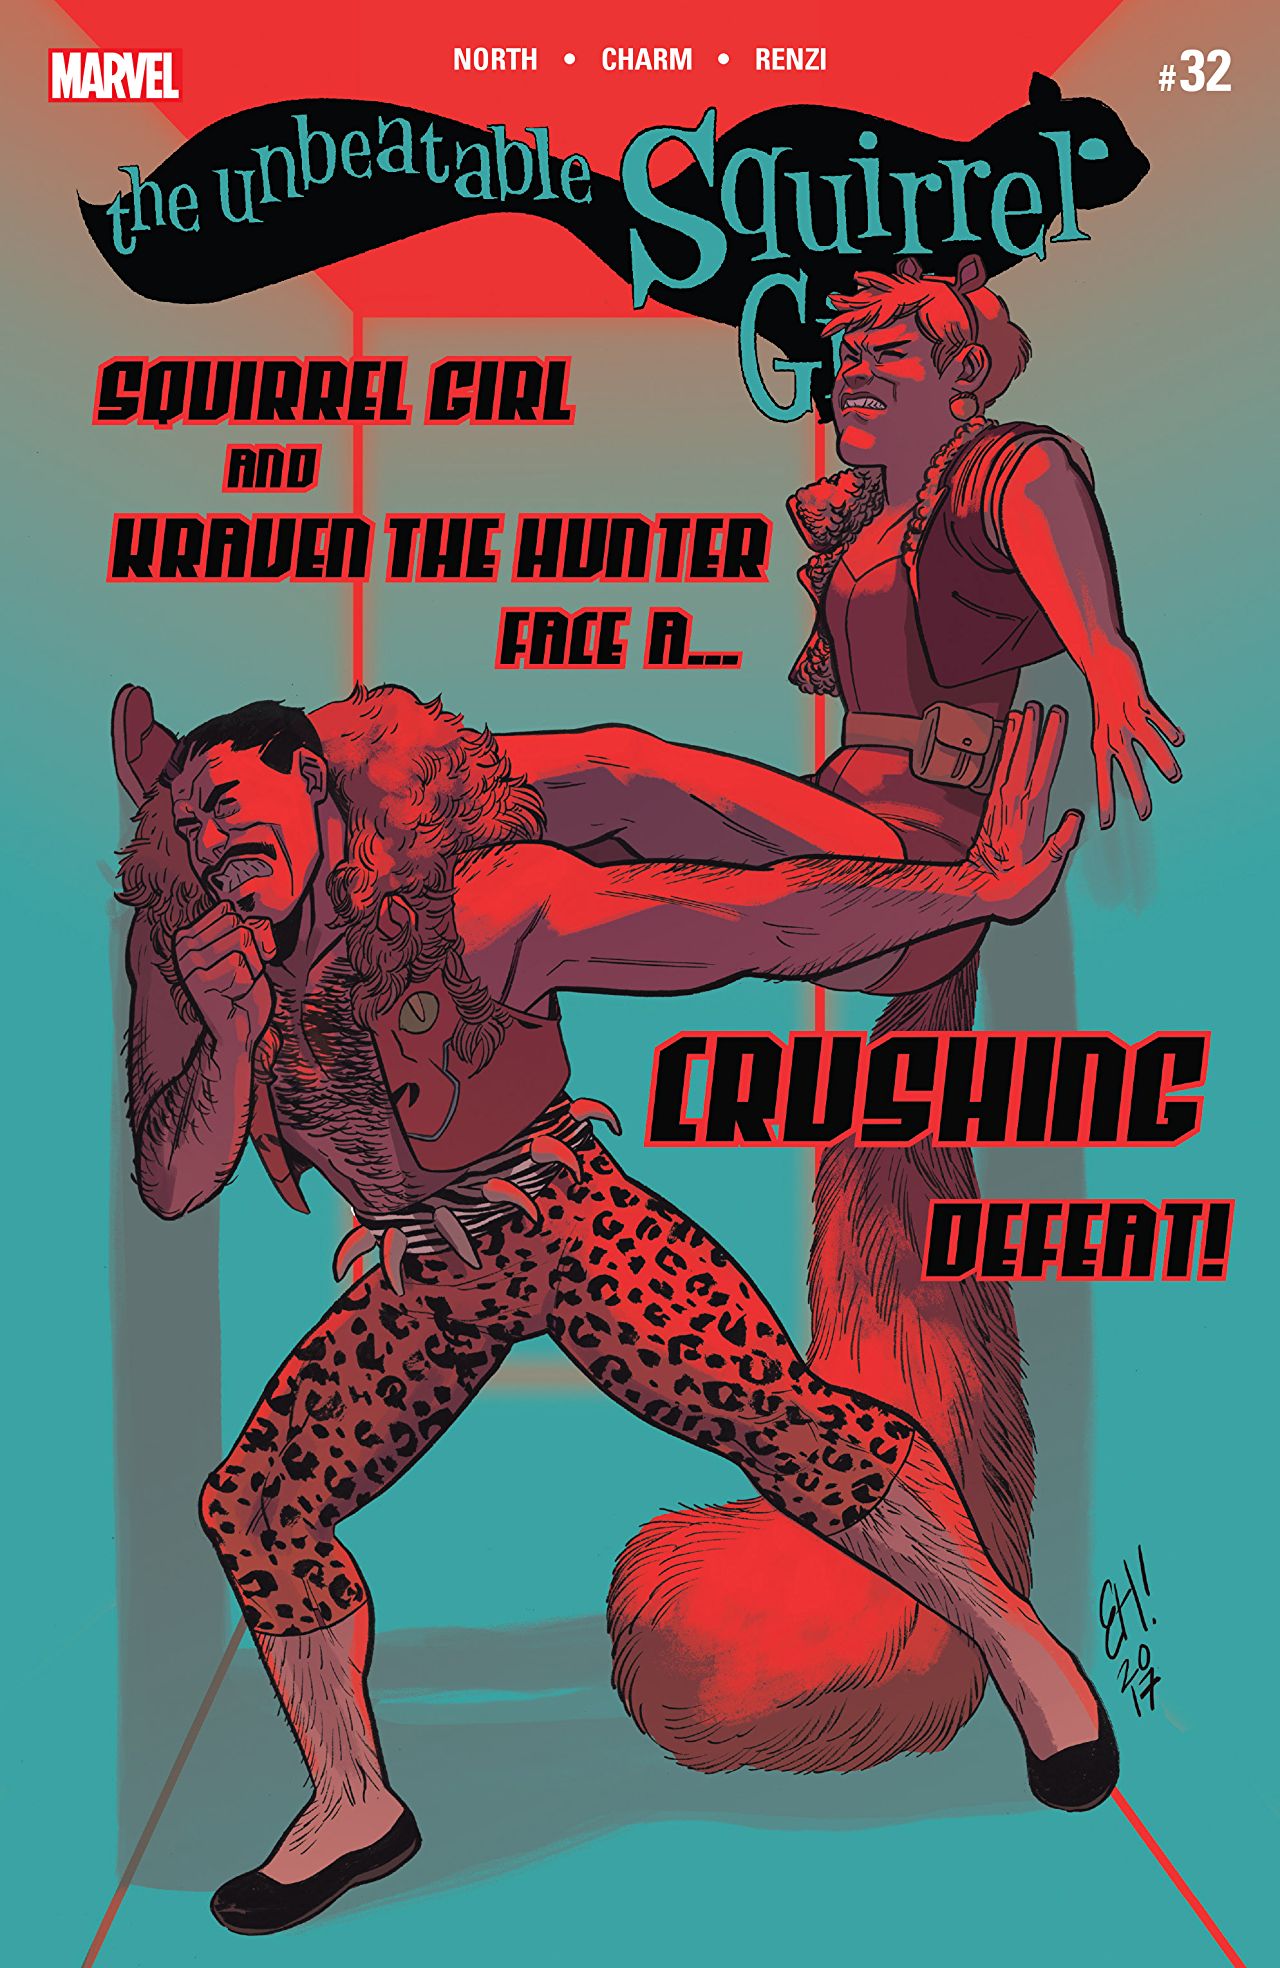 The Unbeatable Squirrel Girl #32 review: A new era and answers to many questions